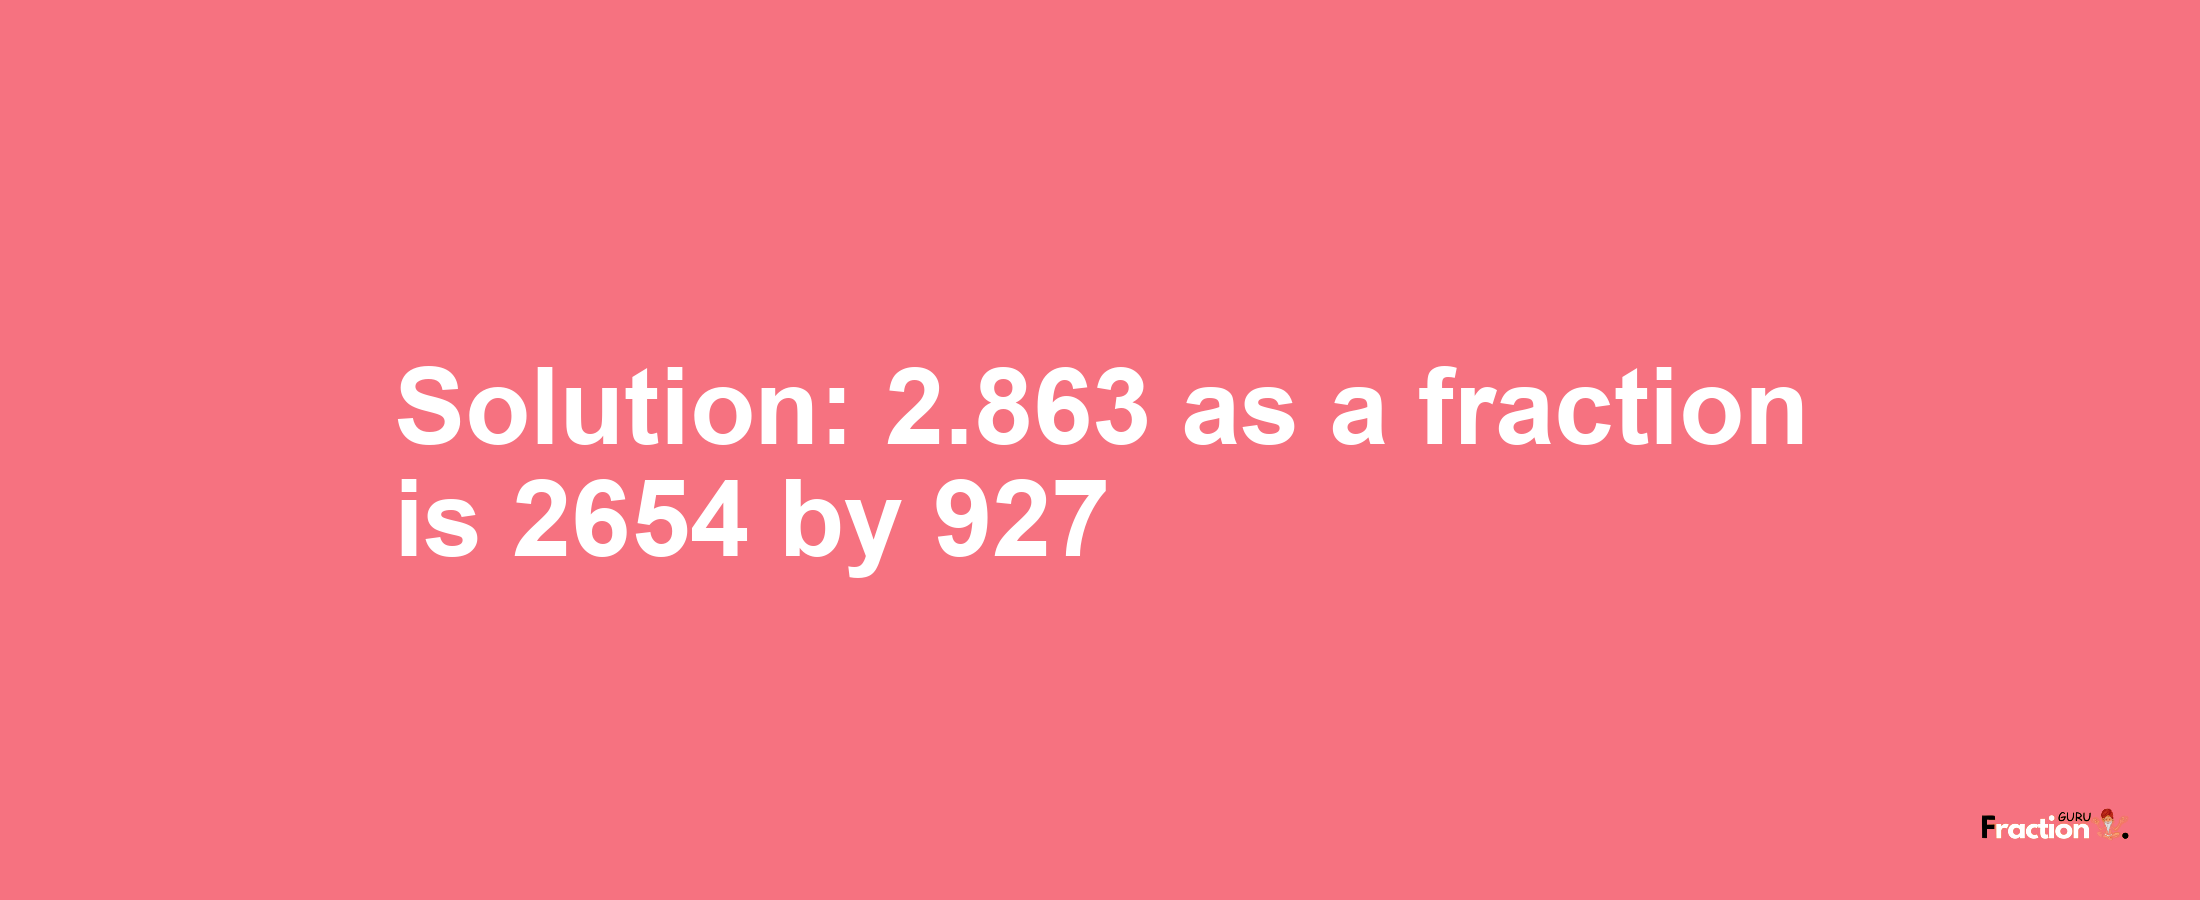 Solution:2.863 as a fraction is 2654/927